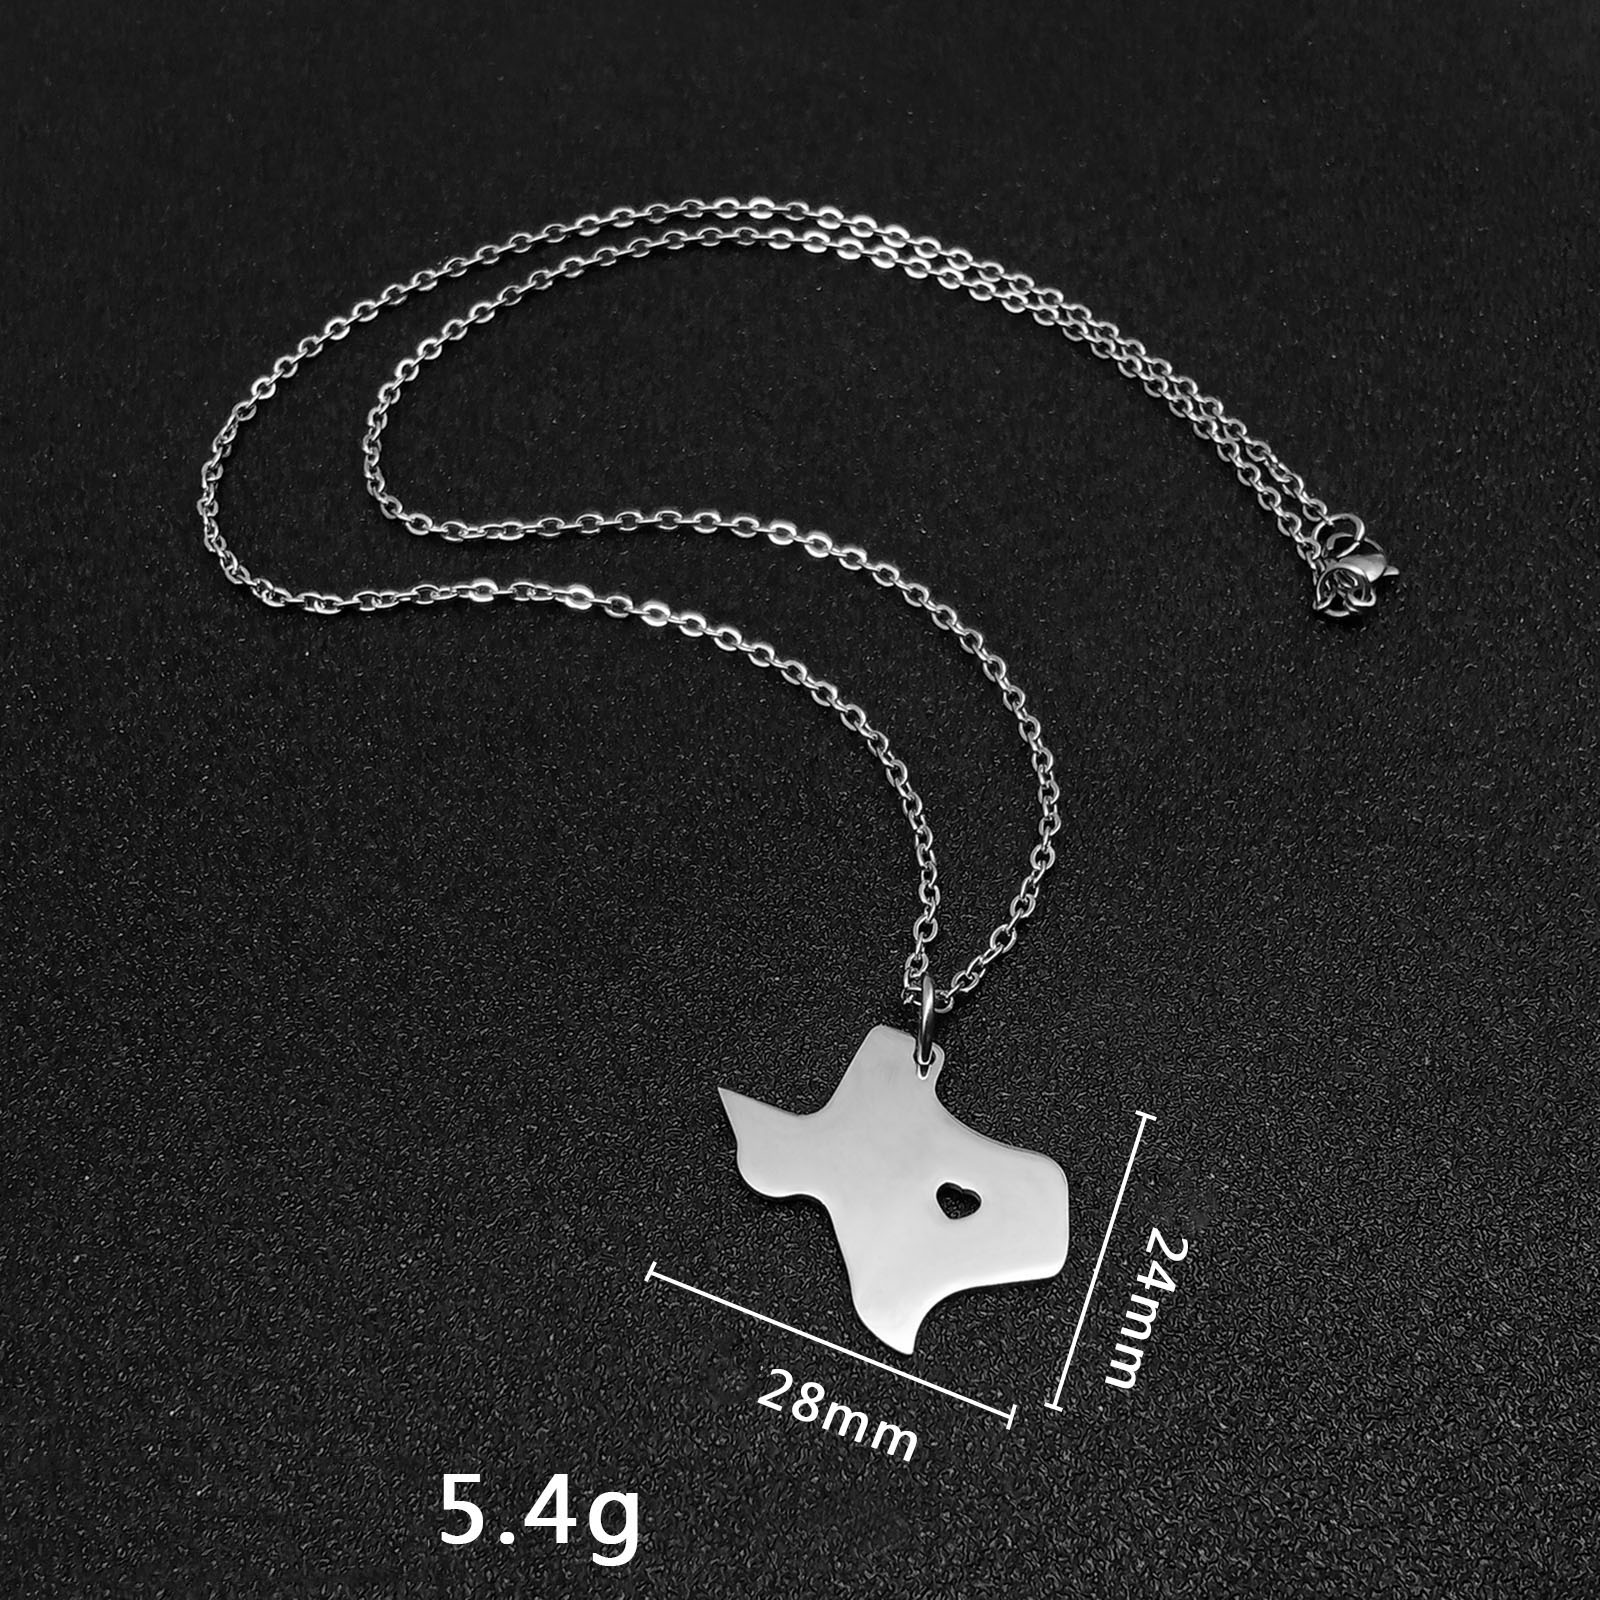 1:The pendant is approximately 28mm long and 24mm high, with a chain length of approximately 50cm